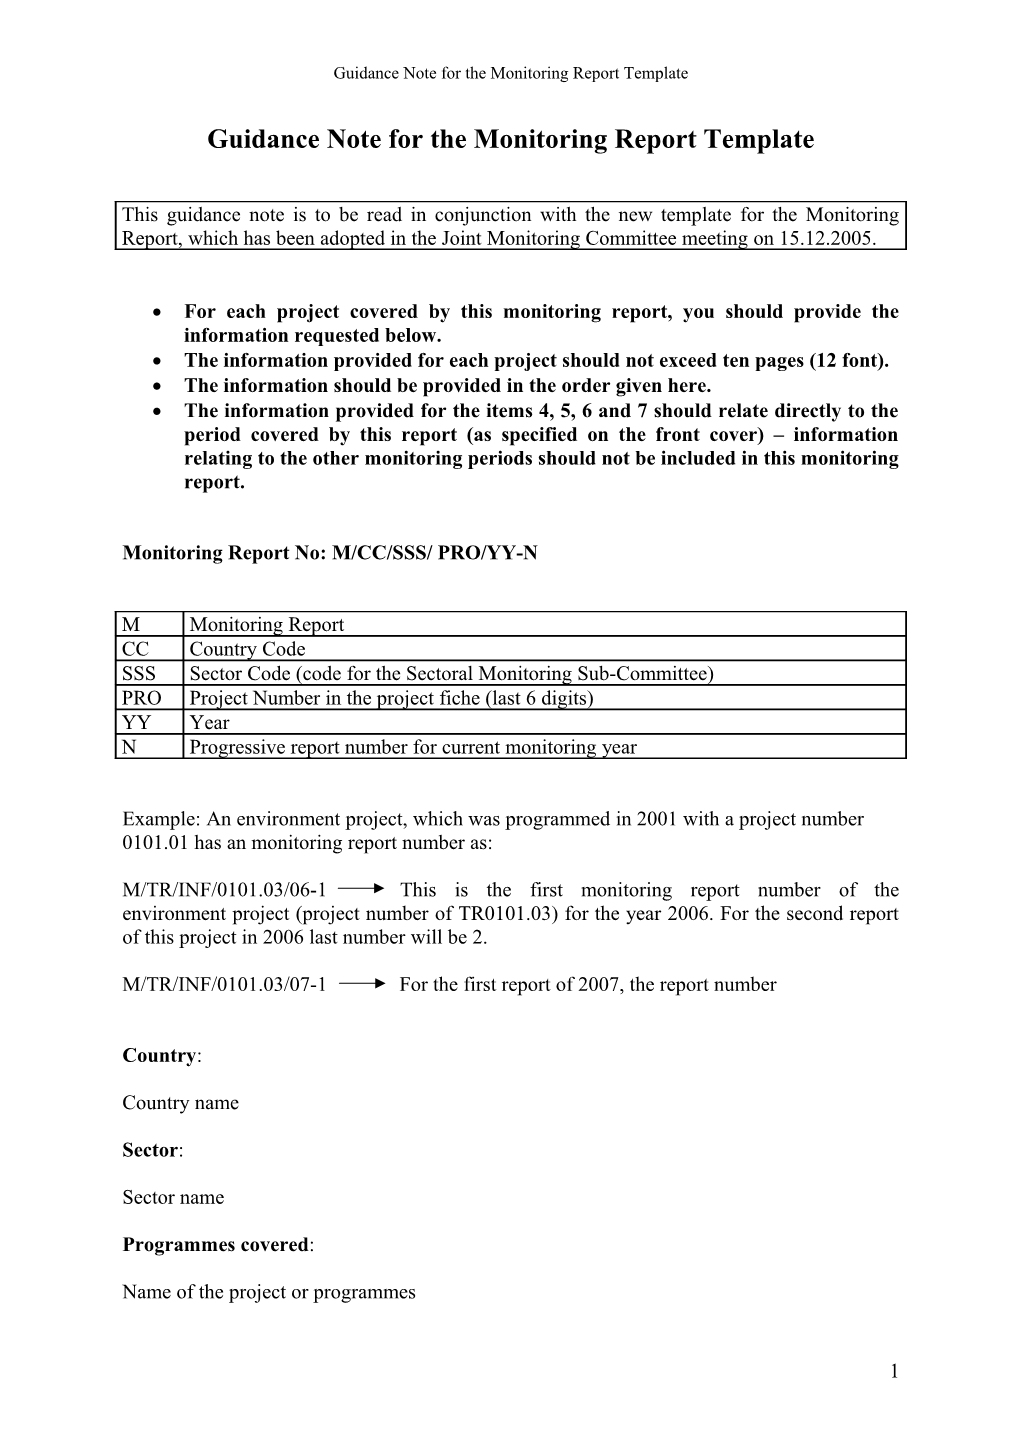 Guidance Note for the Monitoring Report Template